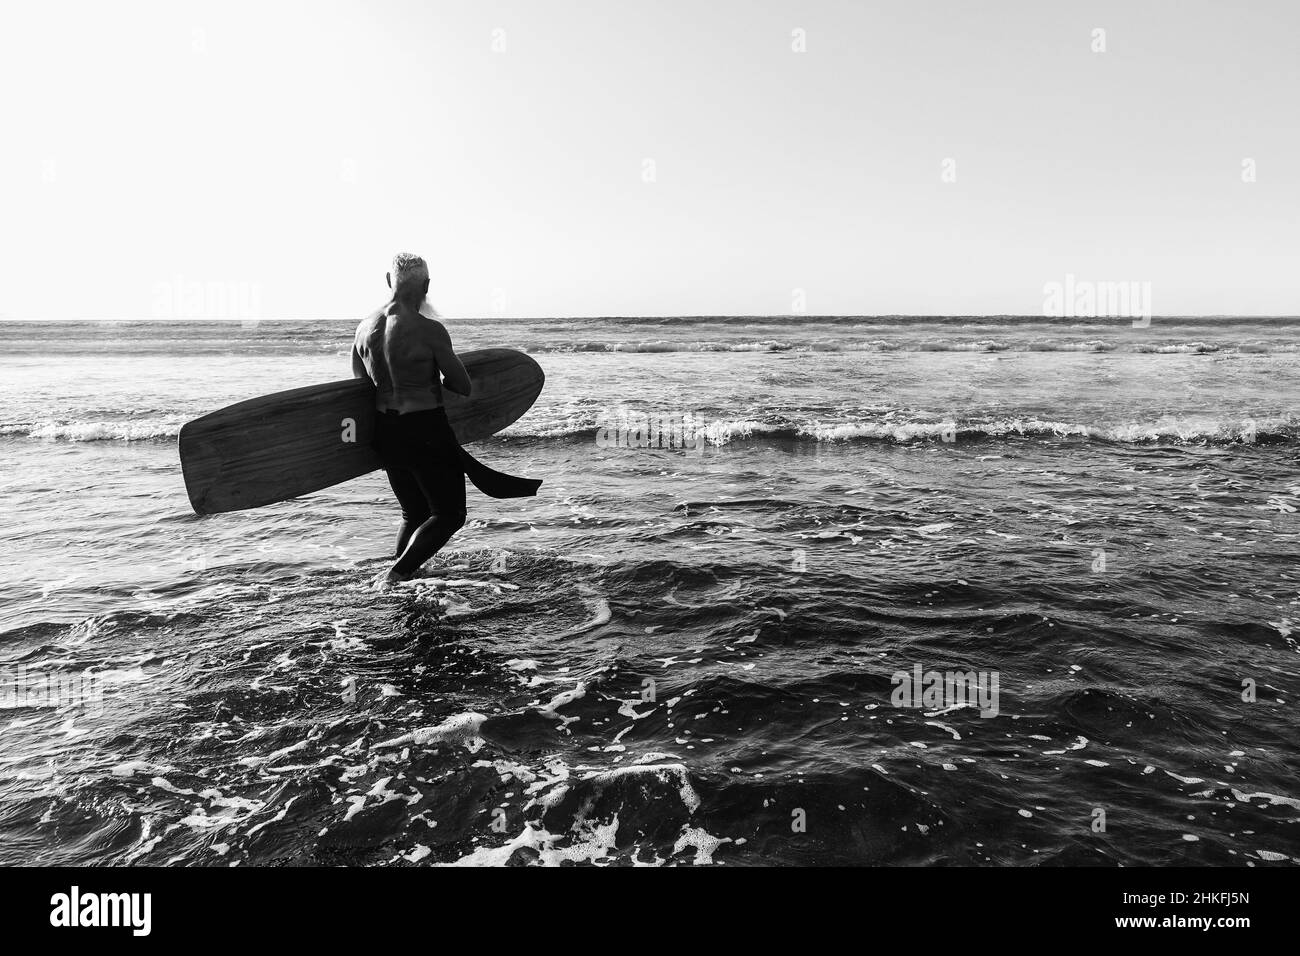 Black and White vintage style photo of a surfer entering the water to go surfing in Hawaii during sunset.